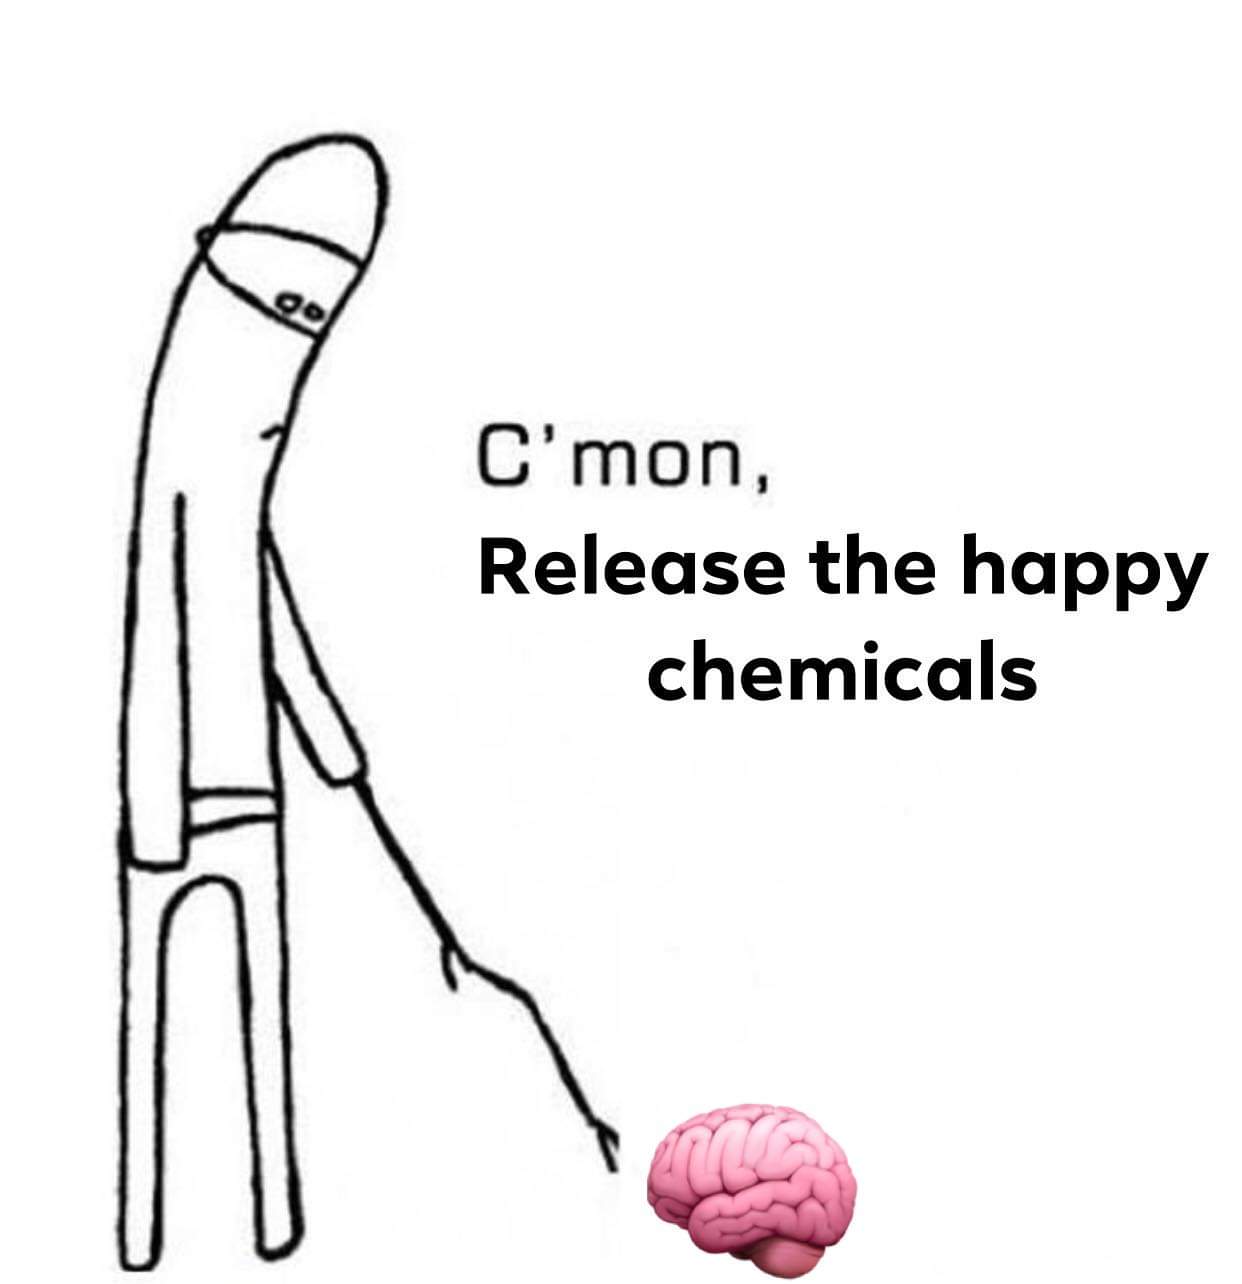 release_the_happy_chemicals.jpg